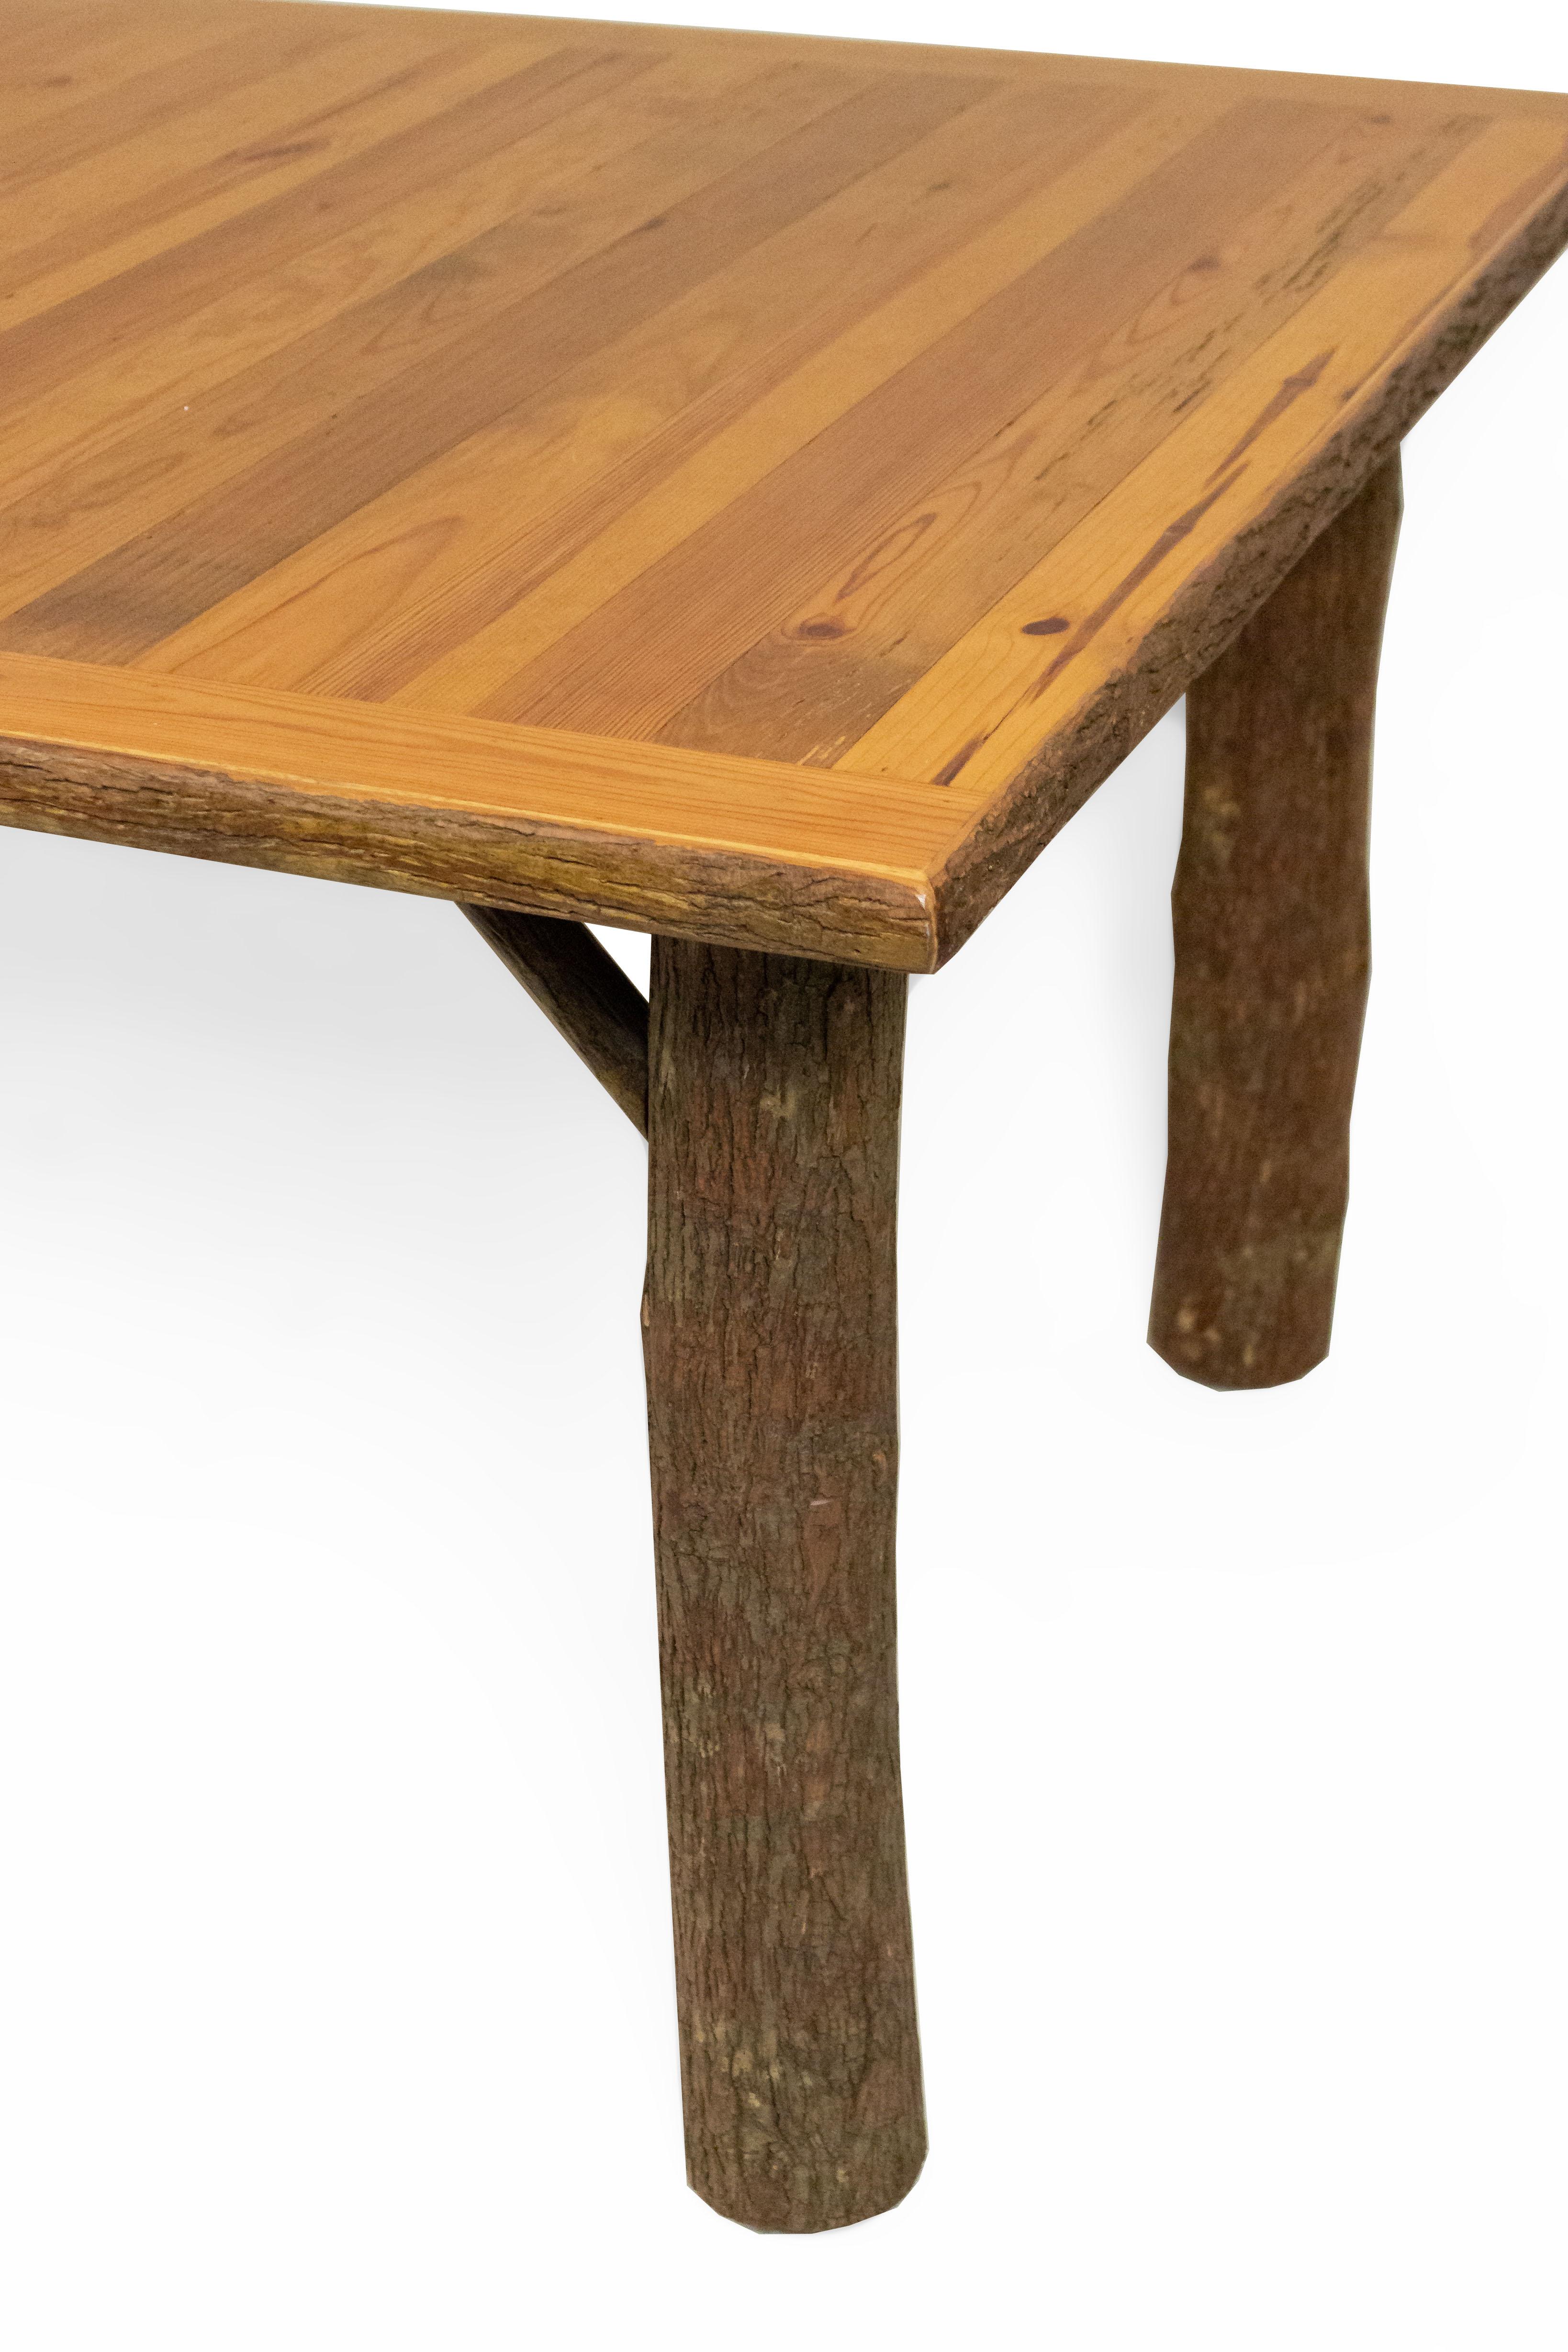 Rustic Old Hickory Dining Table with Bark Legs In Good Condition For Sale In New York, NY